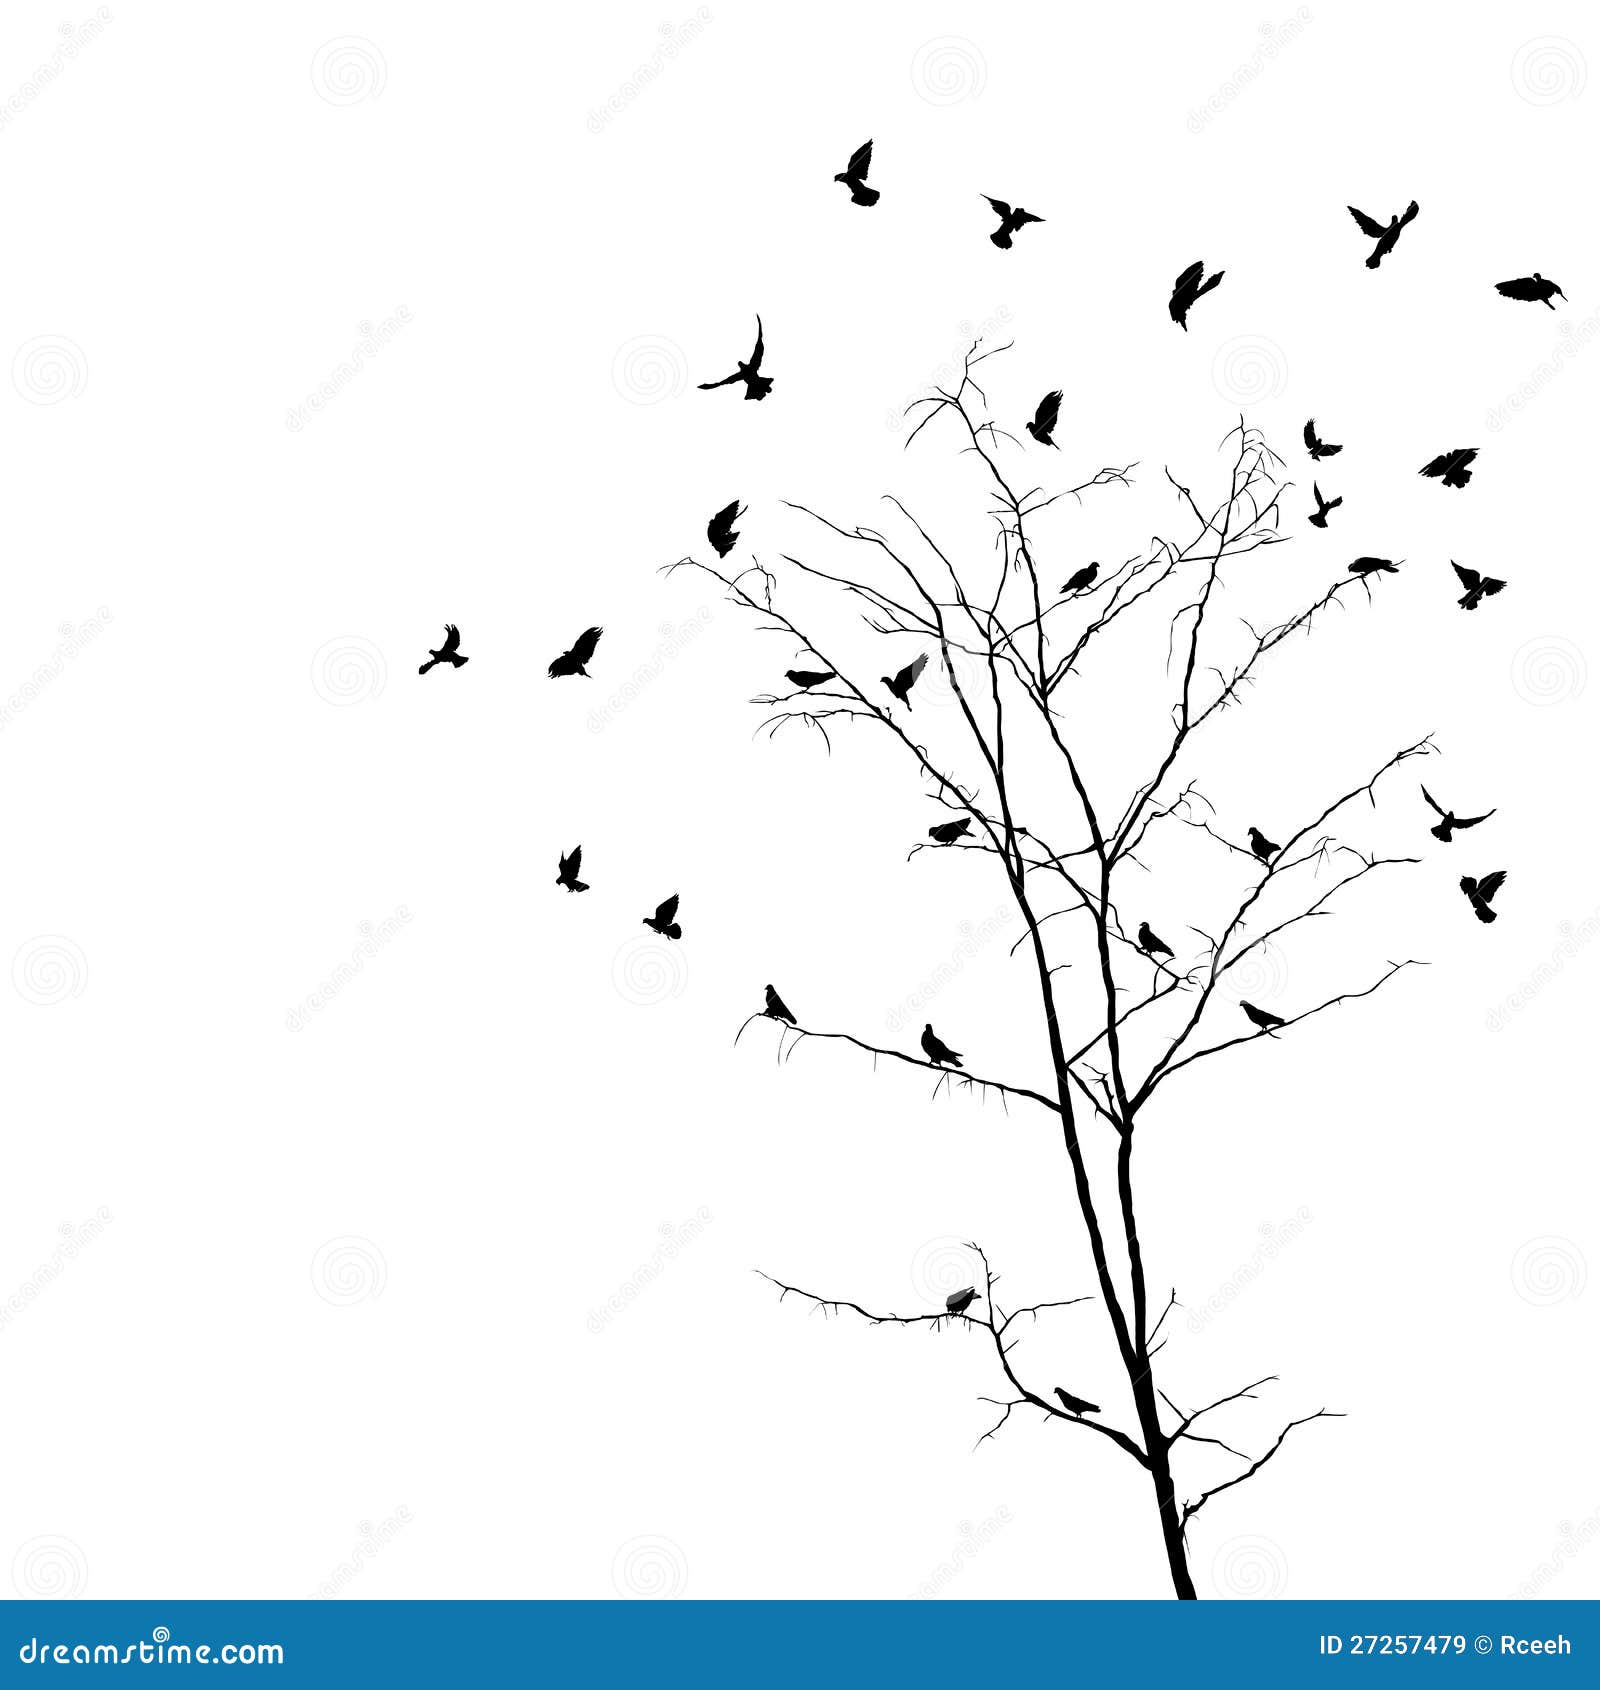 Birds and tree silhouettes stock vector. Illustration of foliage - 27257479